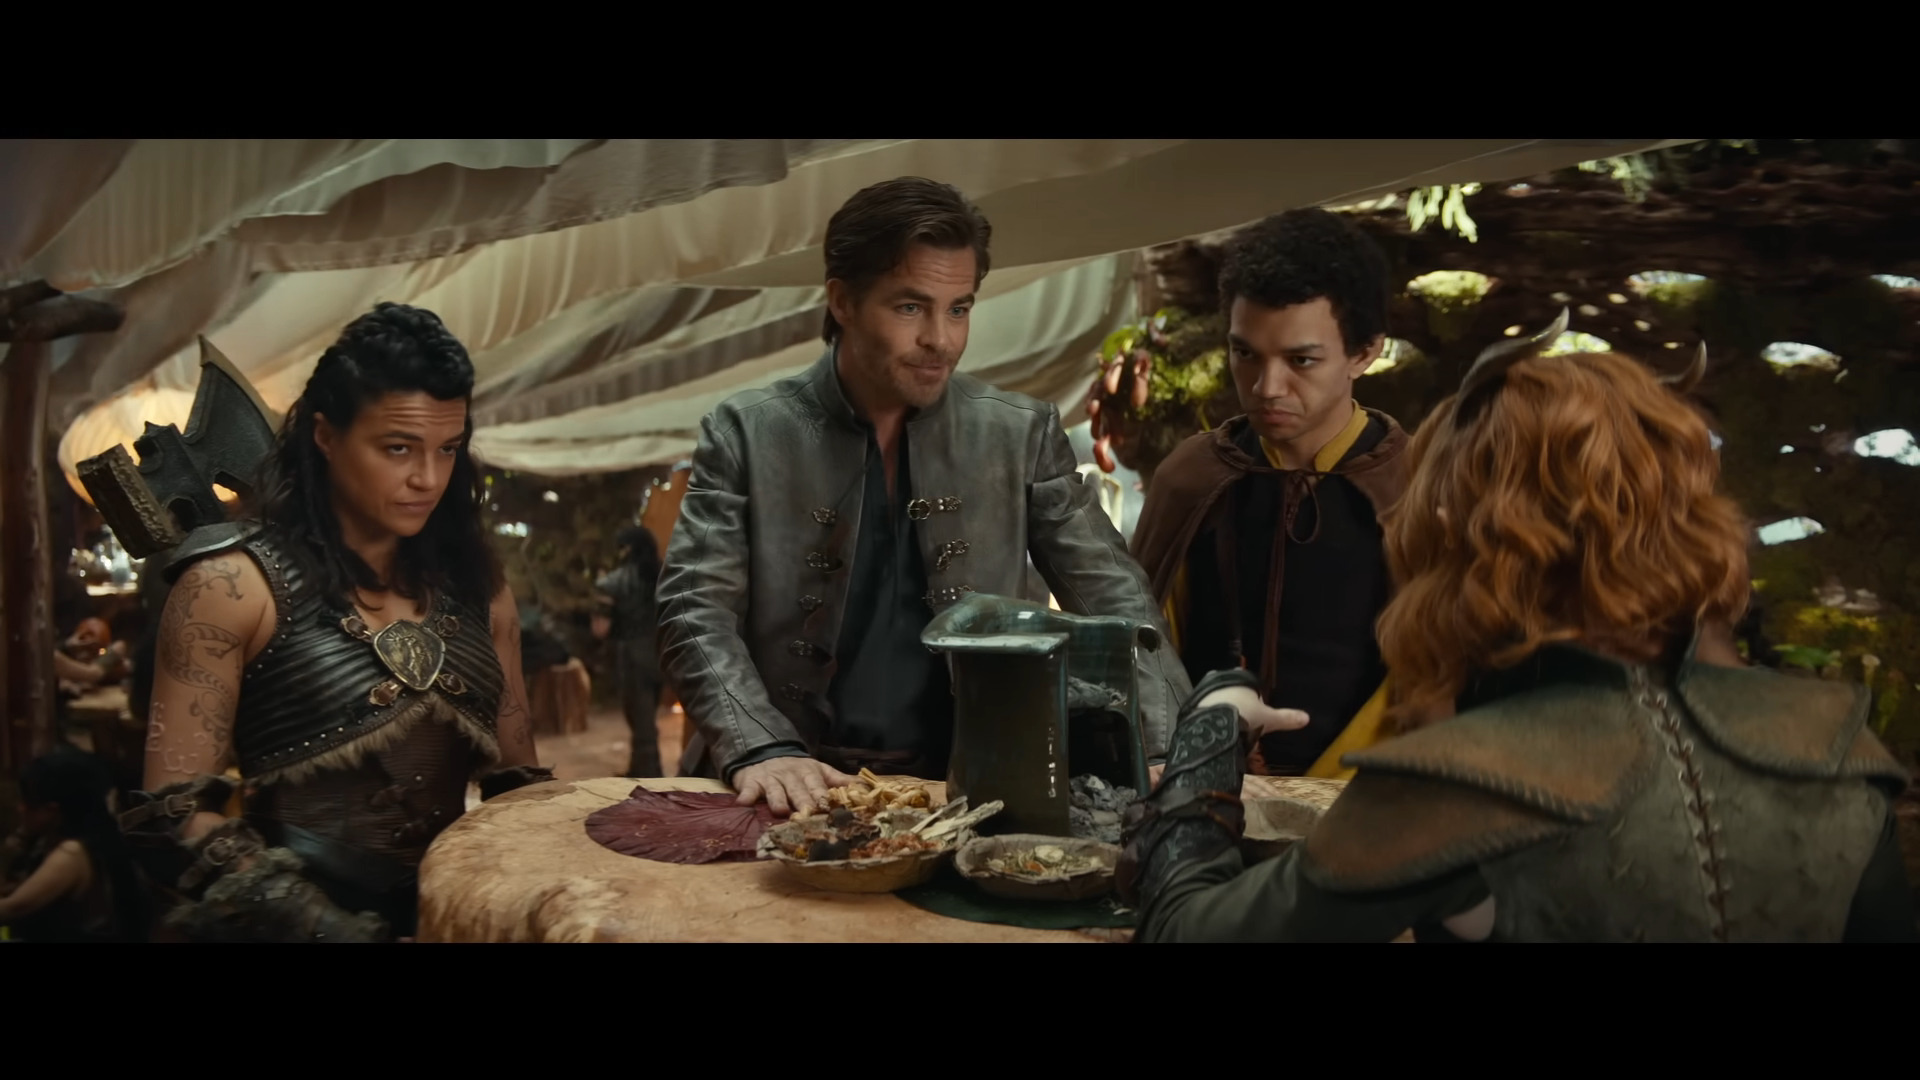 Edgin the Bard (Chris Pine) attempts to reassure Holga the Barbarian (Michelle Rodriguez), Simon the Sorcerer (Justice Smith), and Doric the Druid (Sophia Lillis) of his leadership skills in Dungeons & Dragons: Honor Among Thieves (2023), Paramount Pictures via YouTube